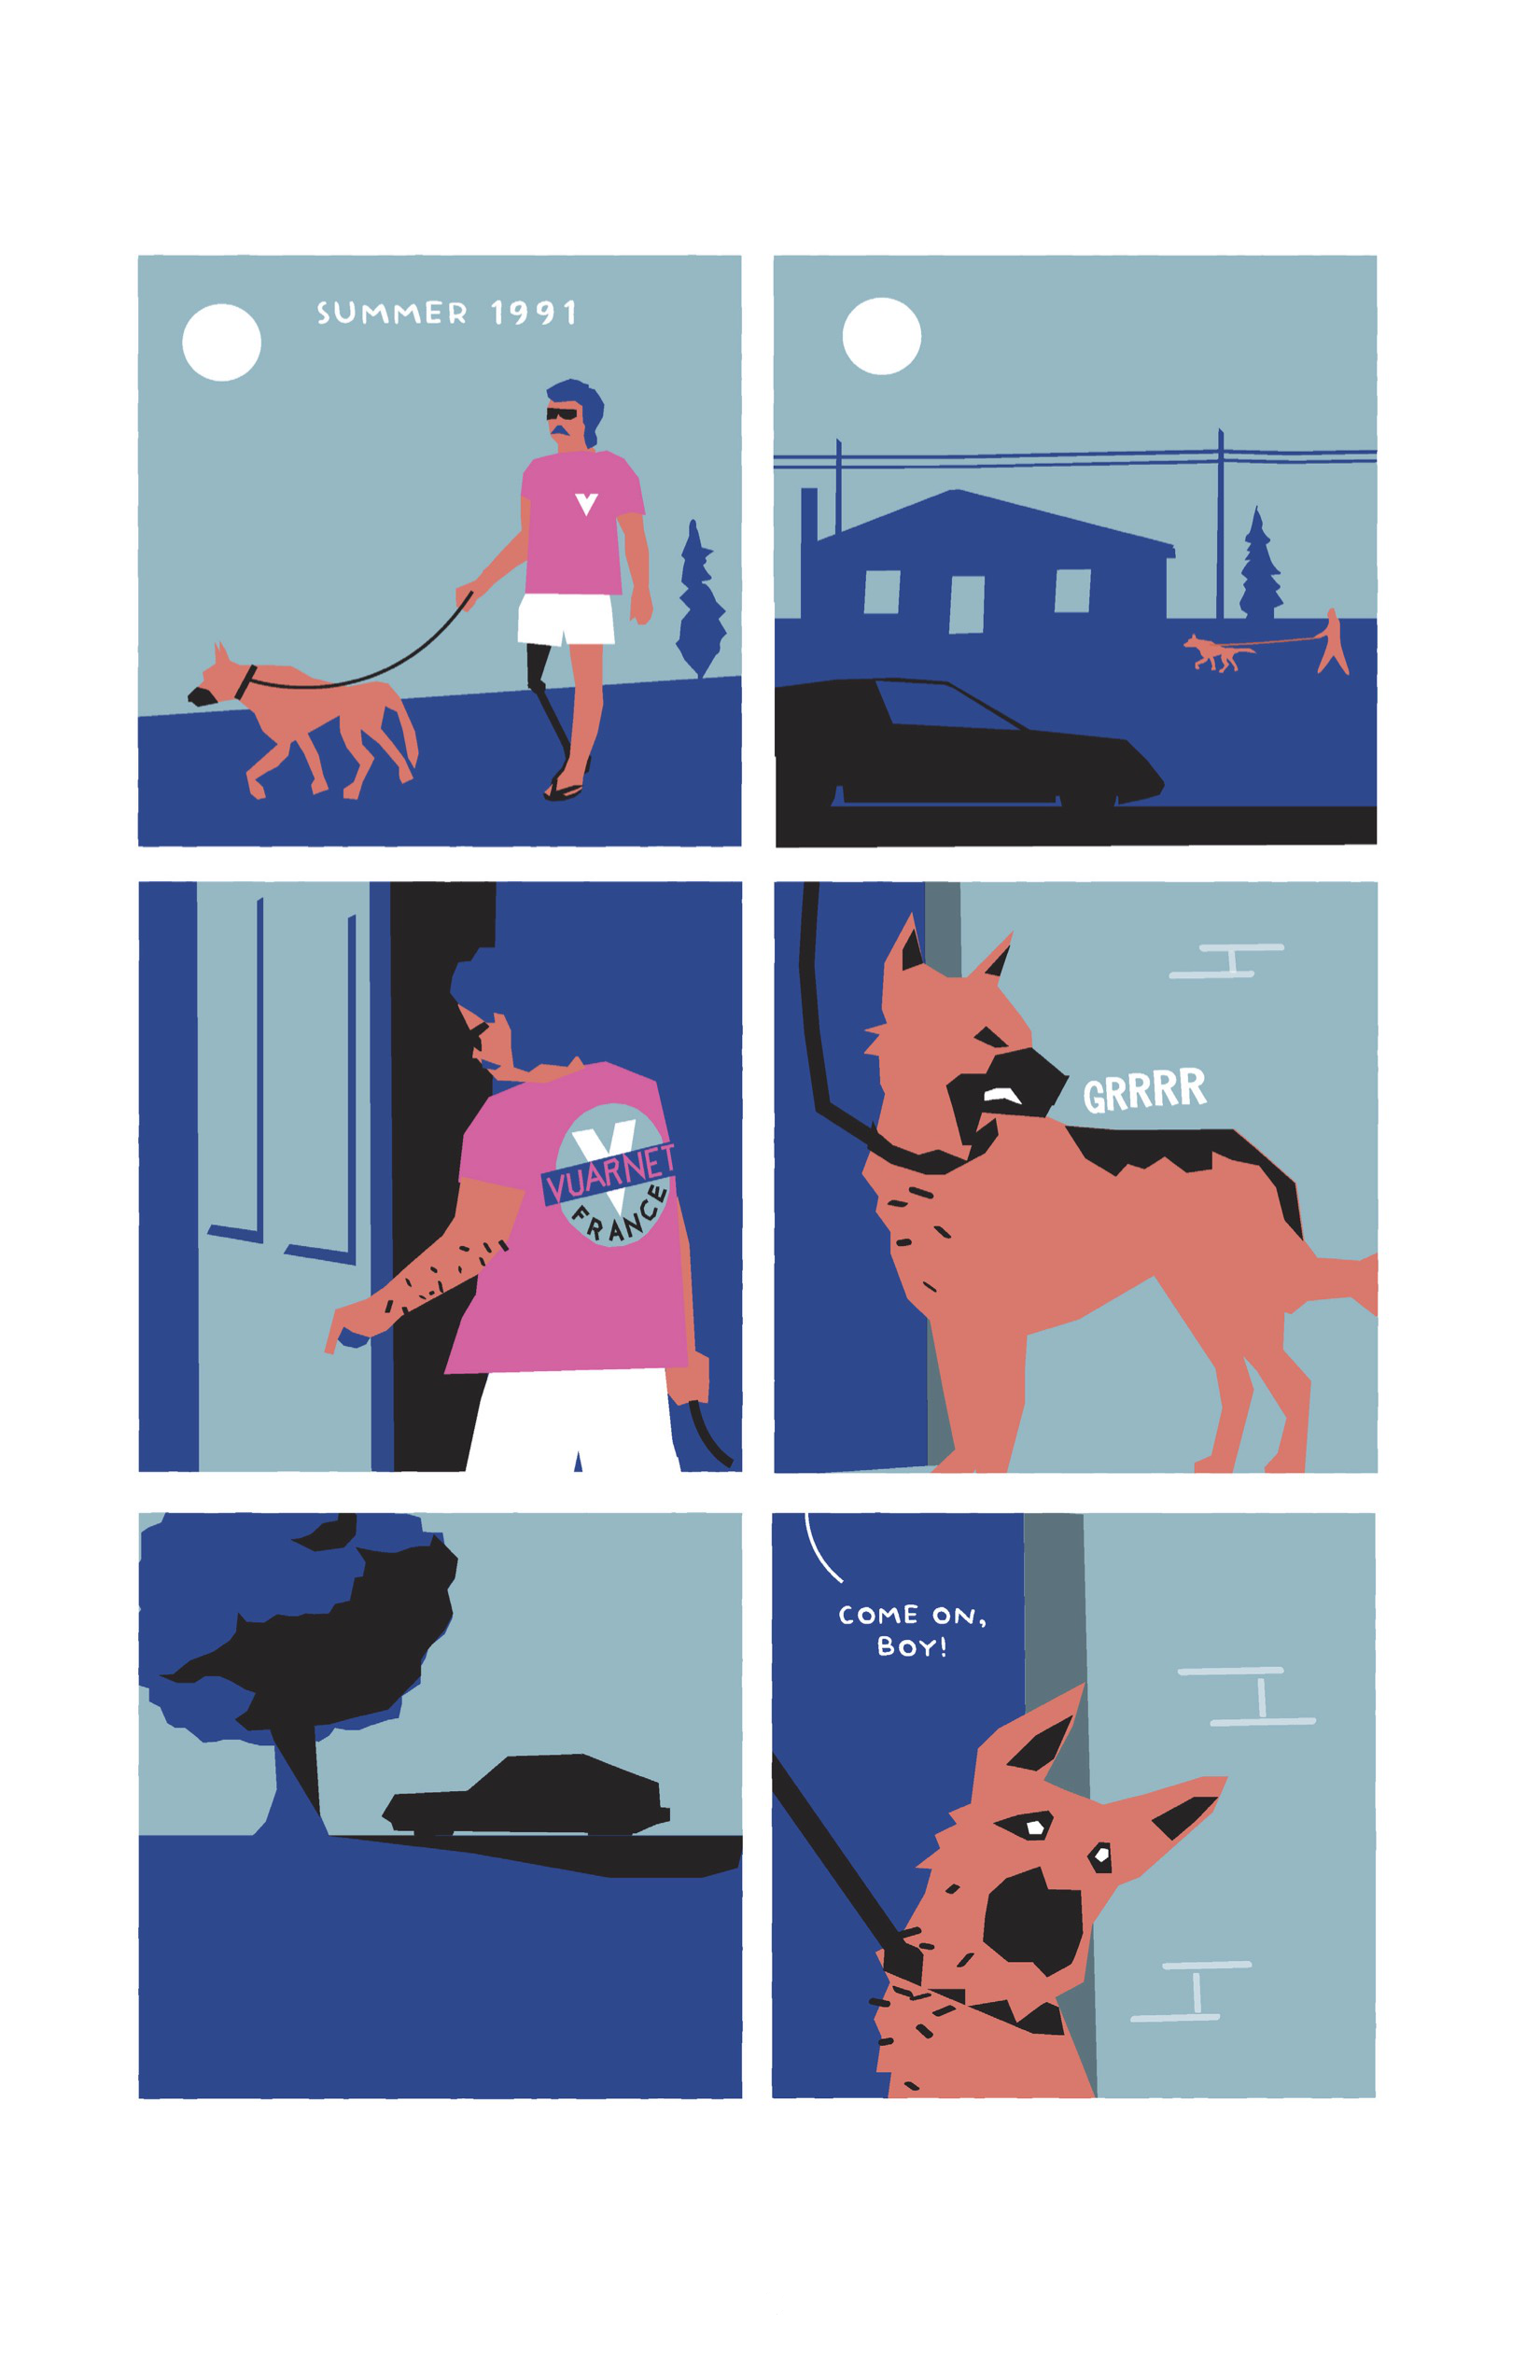 This page is divided into six square panels with cyan backgrounds. 1. Guy is walking his German shepherd outside. Guy is wearing his aviators, along with a pink t-shirt with a V logo, white shorts, and flip-flops. His right leg is a prosthetic. In the background are a white sun and a skinny blue evergreen tree. In white text: "Summer 1991" 2. We zoom out to a long-shot of Guy and the dog, rendered in peach, walking past a blue house on a dark blue road; a black car is in the foreground. The sun is still up, and a tree and power lines are also featured in the dark blue plane of the background. 3. From behind, we see Guy, back in standard colors, entering a door. The back of his shirt shows a larger, more detailed logo for Vuarnet: a cyan circle with a white V in the center, overset by a stripe of blue with a pink Vuarnet label The word â€œFranceâ€ curves at the bottom. 4. The German shepherd turns its head back and snarls: GRRRR. 5. The black silhouette of a car sits in the distance on a plane of blue, in the shade cast by a blue tree with black shadows. 6. Off-panel, Guy tugs on the dogâ€™s leash. The dog is still looking behind, head cocked to the side and eyes wide. Guy says, â€œCome on, boy!â€